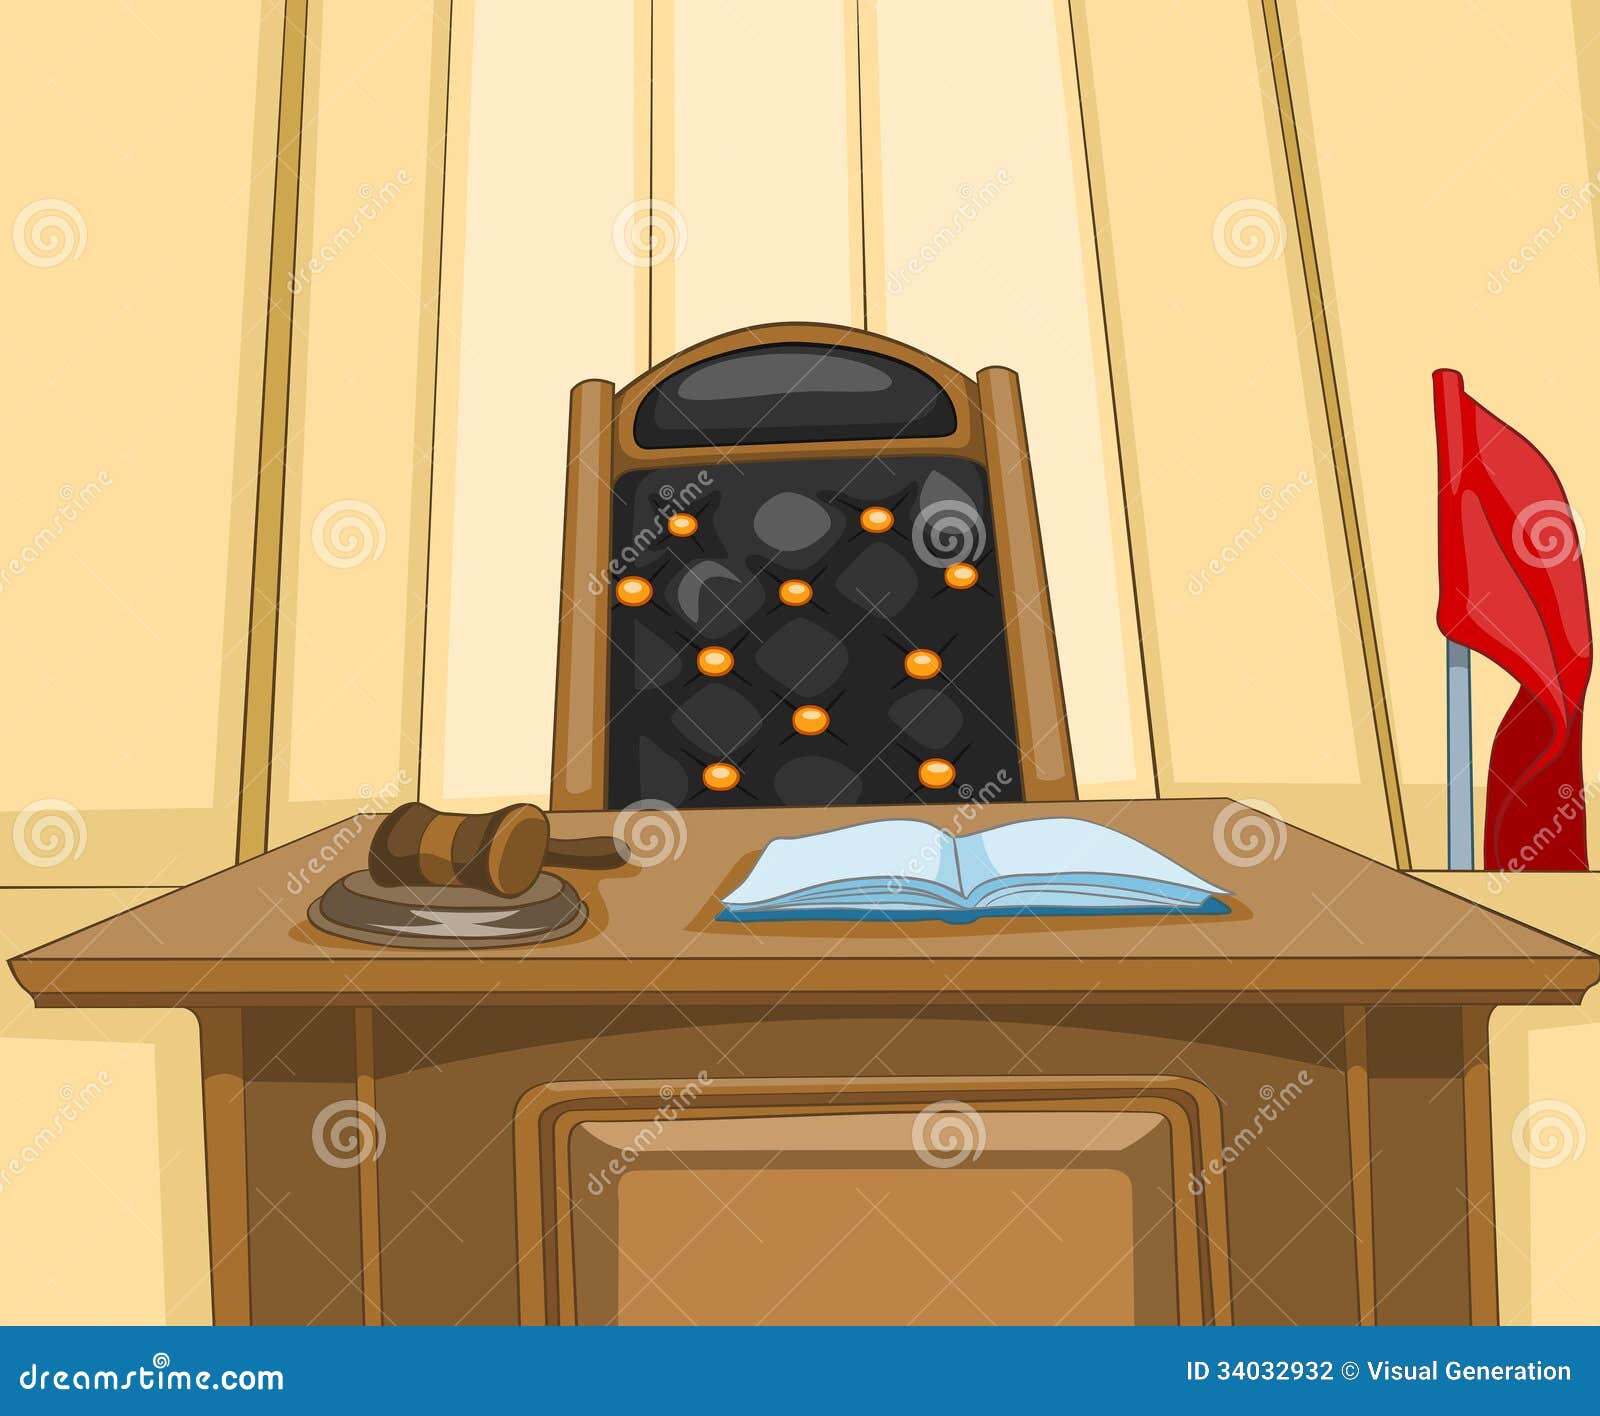 courtroom clipart - photo #17